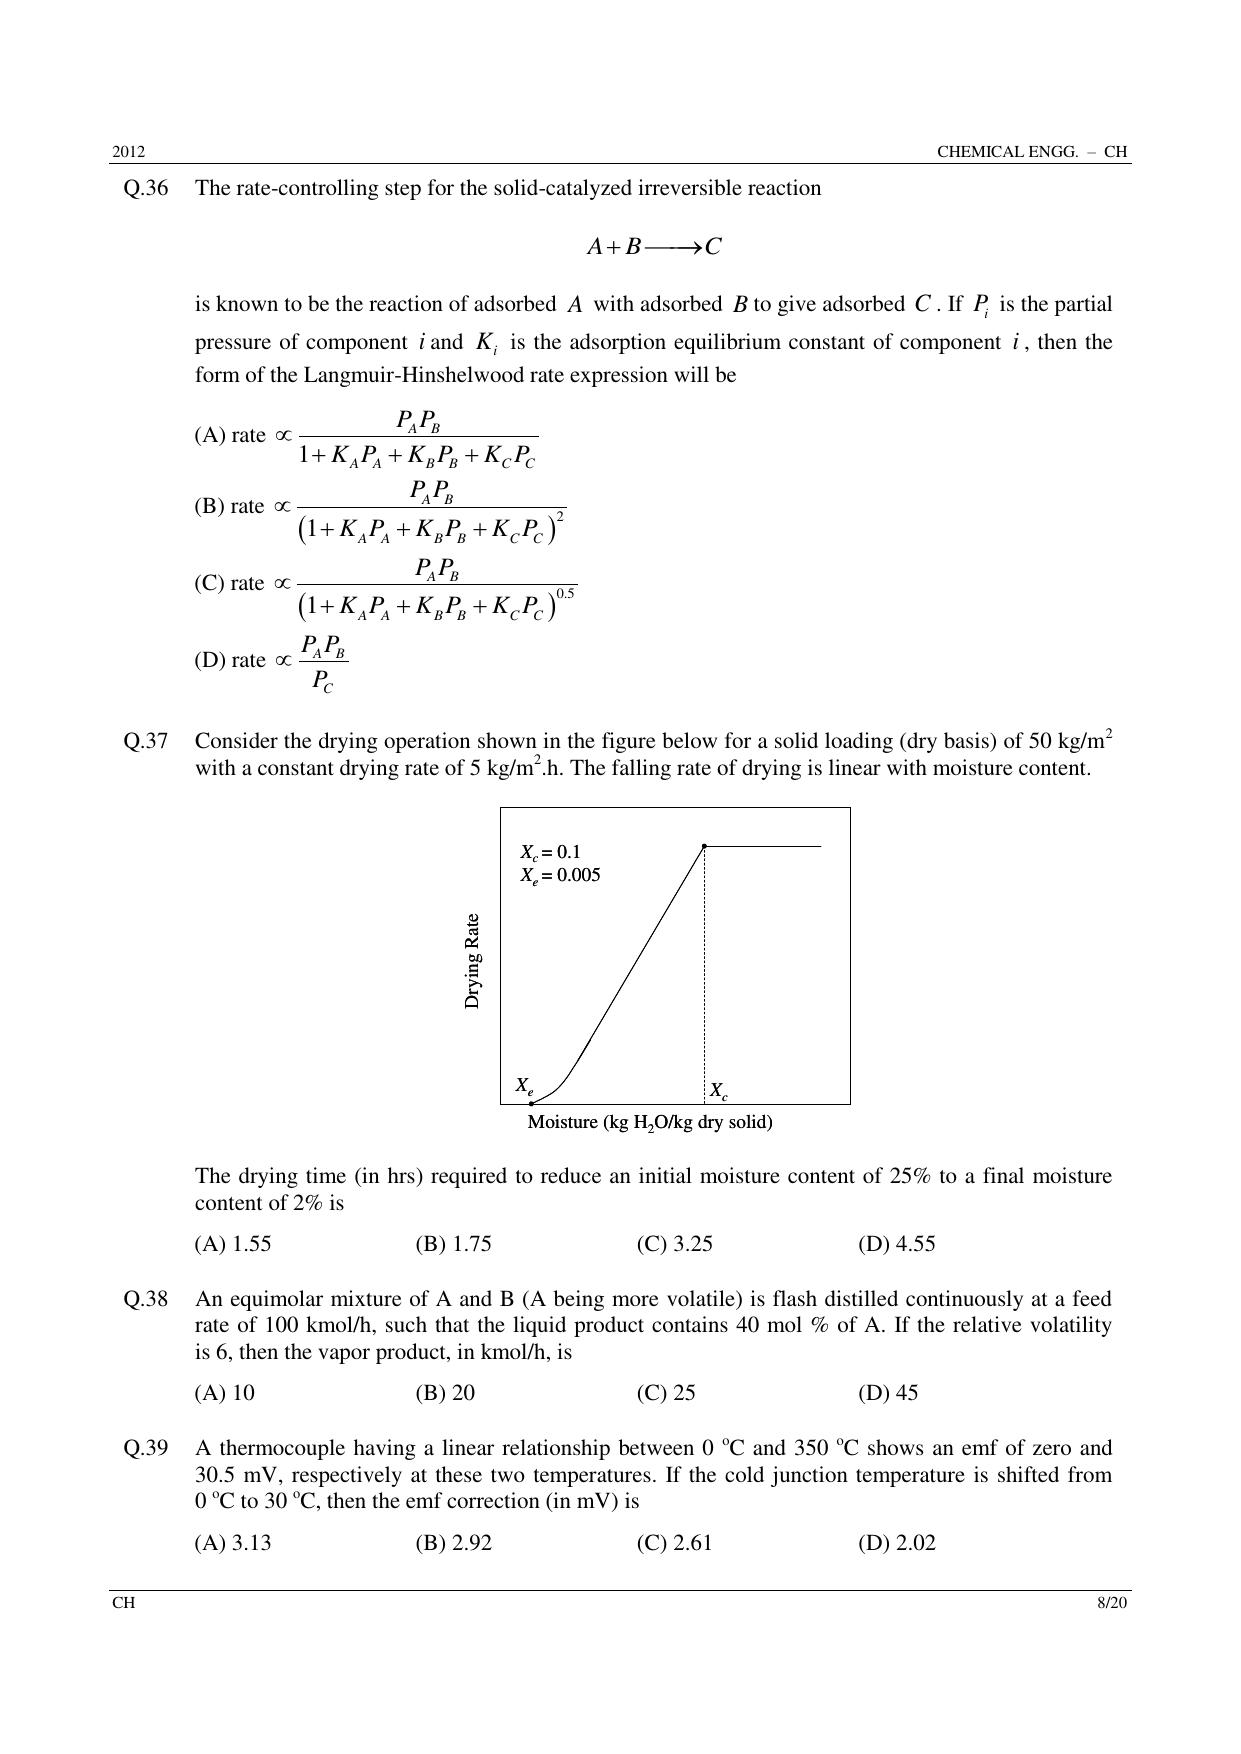 GATE 2012 Chemical Engineering (CH) Question Paper with Answer Key - Page 8